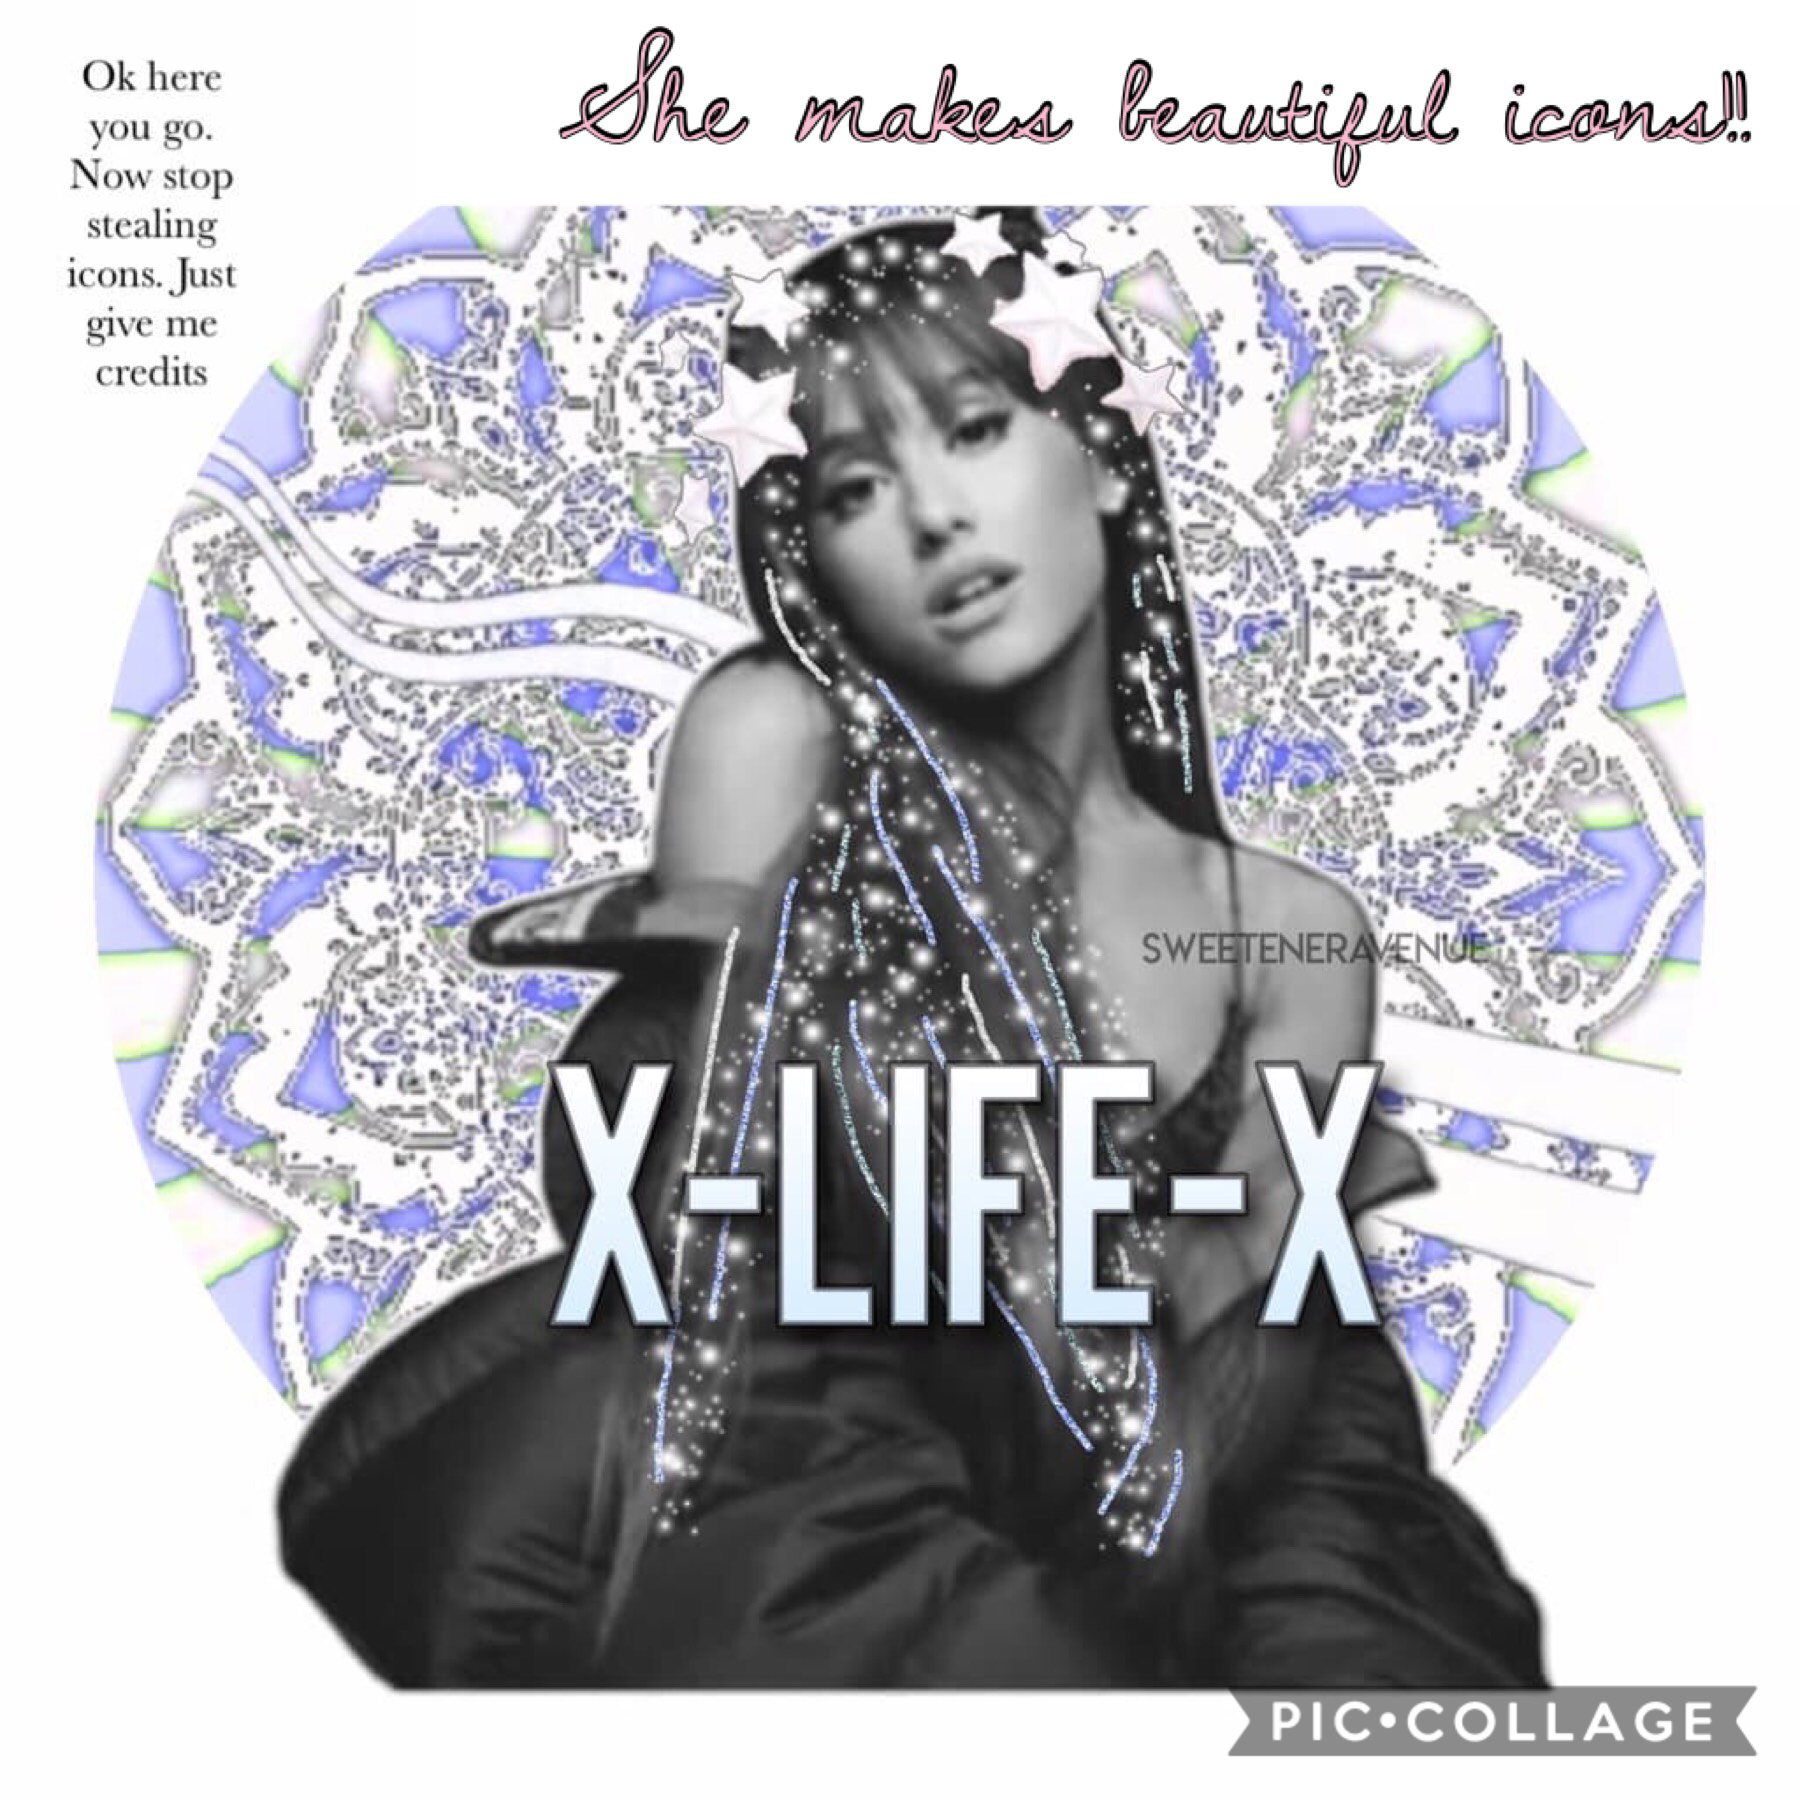 She is so talented! Look at this icon she made!! Just give credit when you get one:)💜💜💜